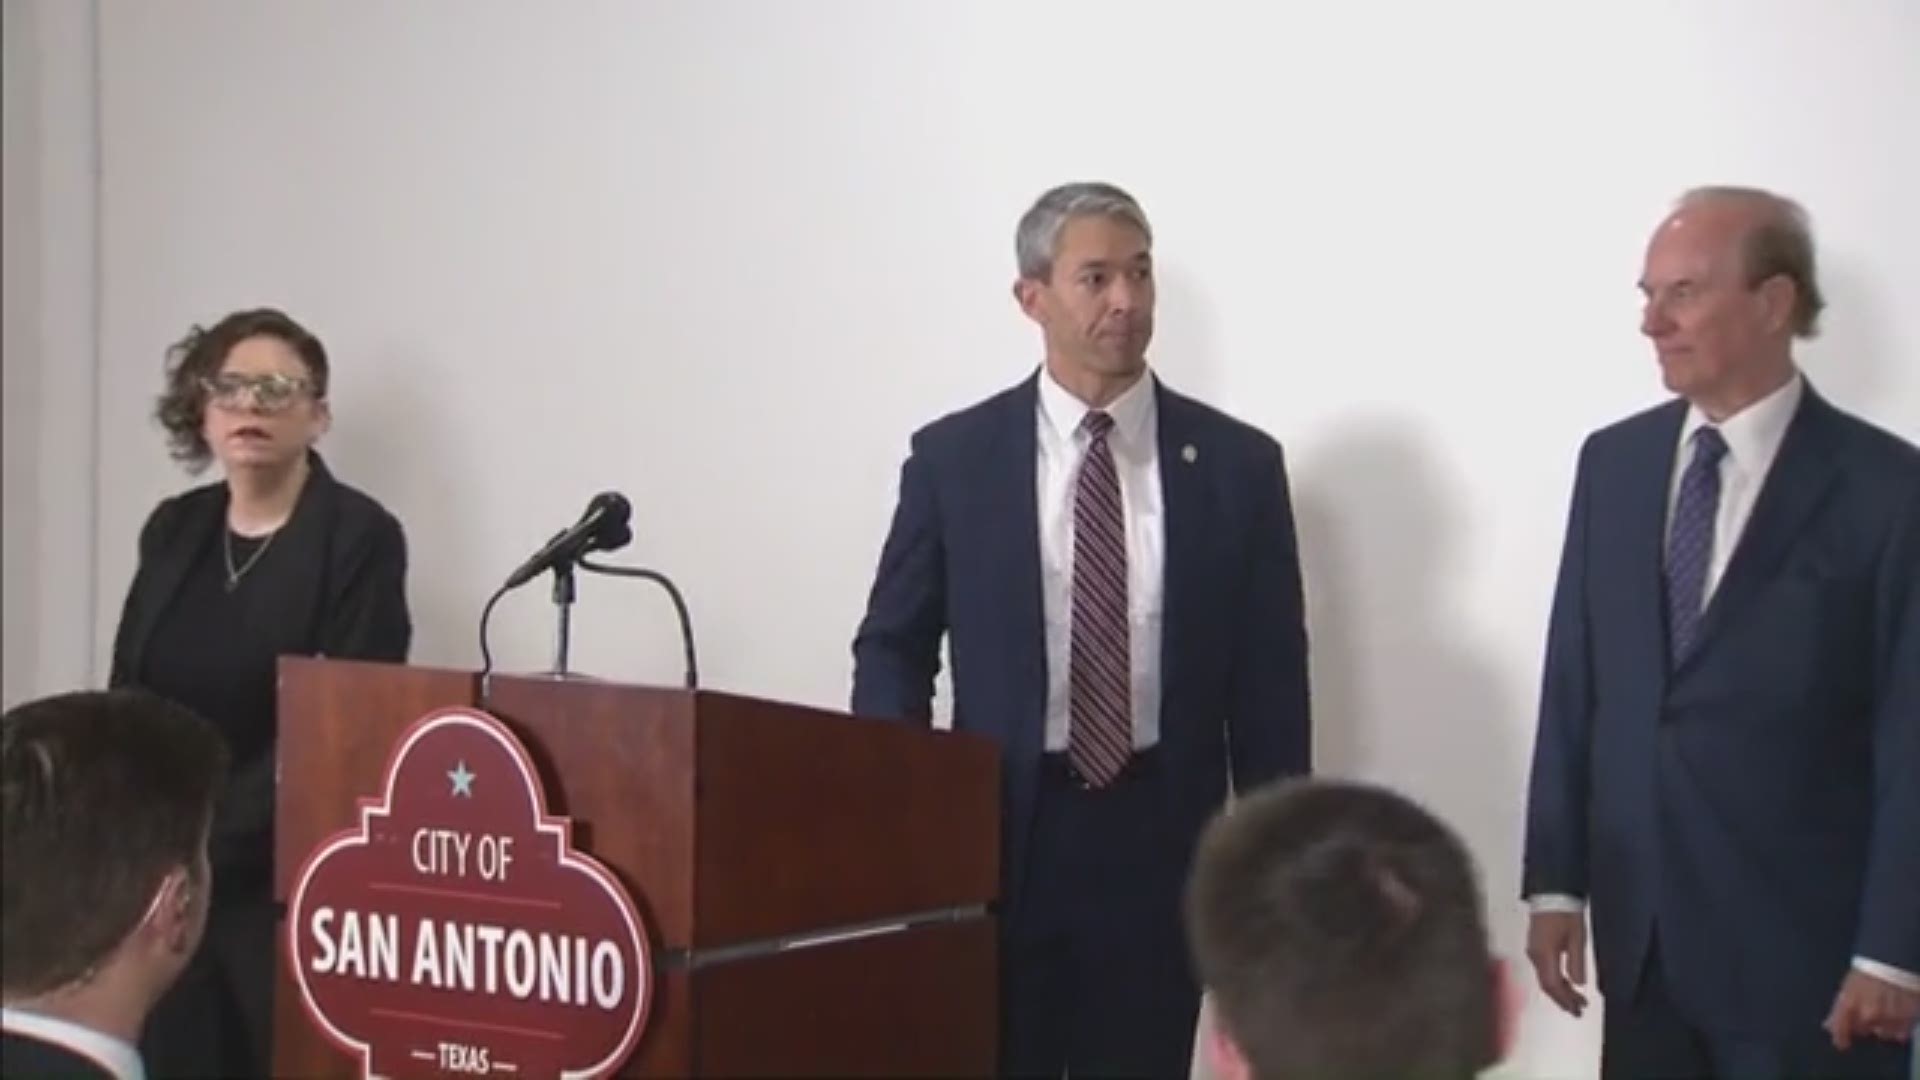 San Antonio leaders address coronavirus response following news of the release of a patient from quarantine who later tested positive for the virus.